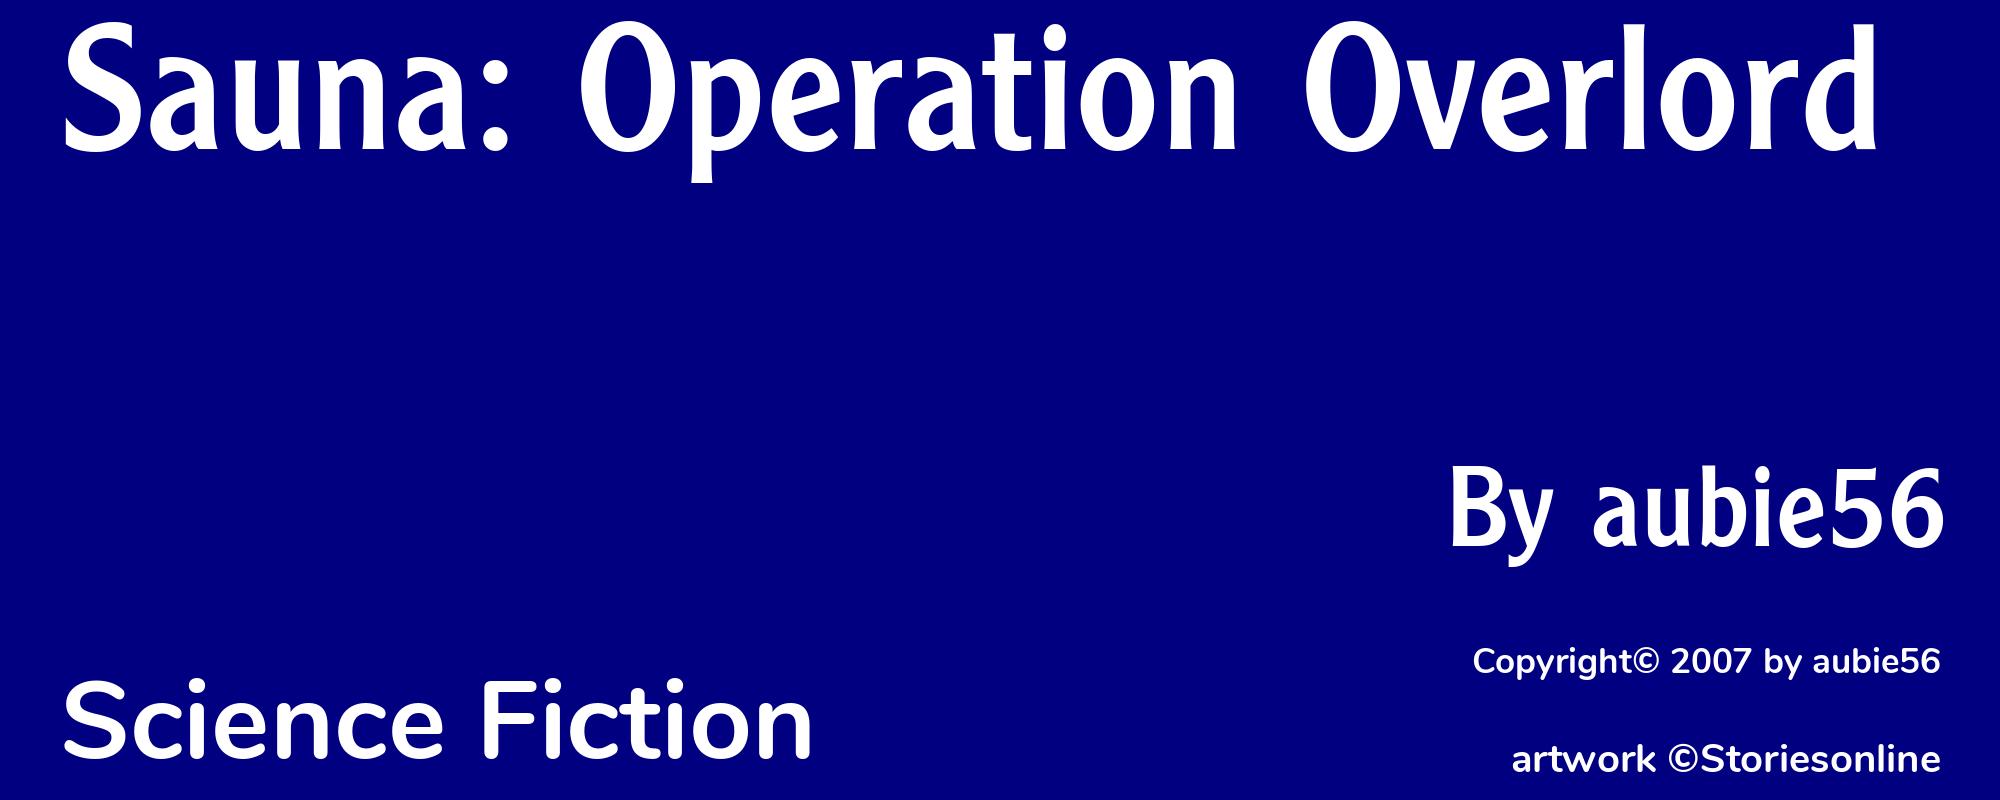 Sauna: Operation Overlord - Cover